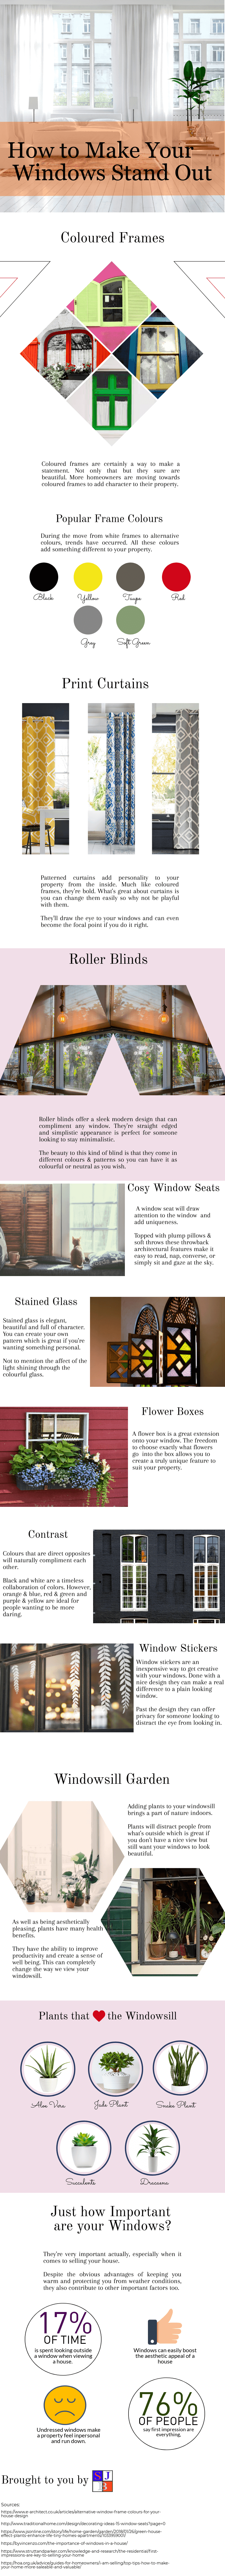 How To Make Your Windows Stand Out - Infographic